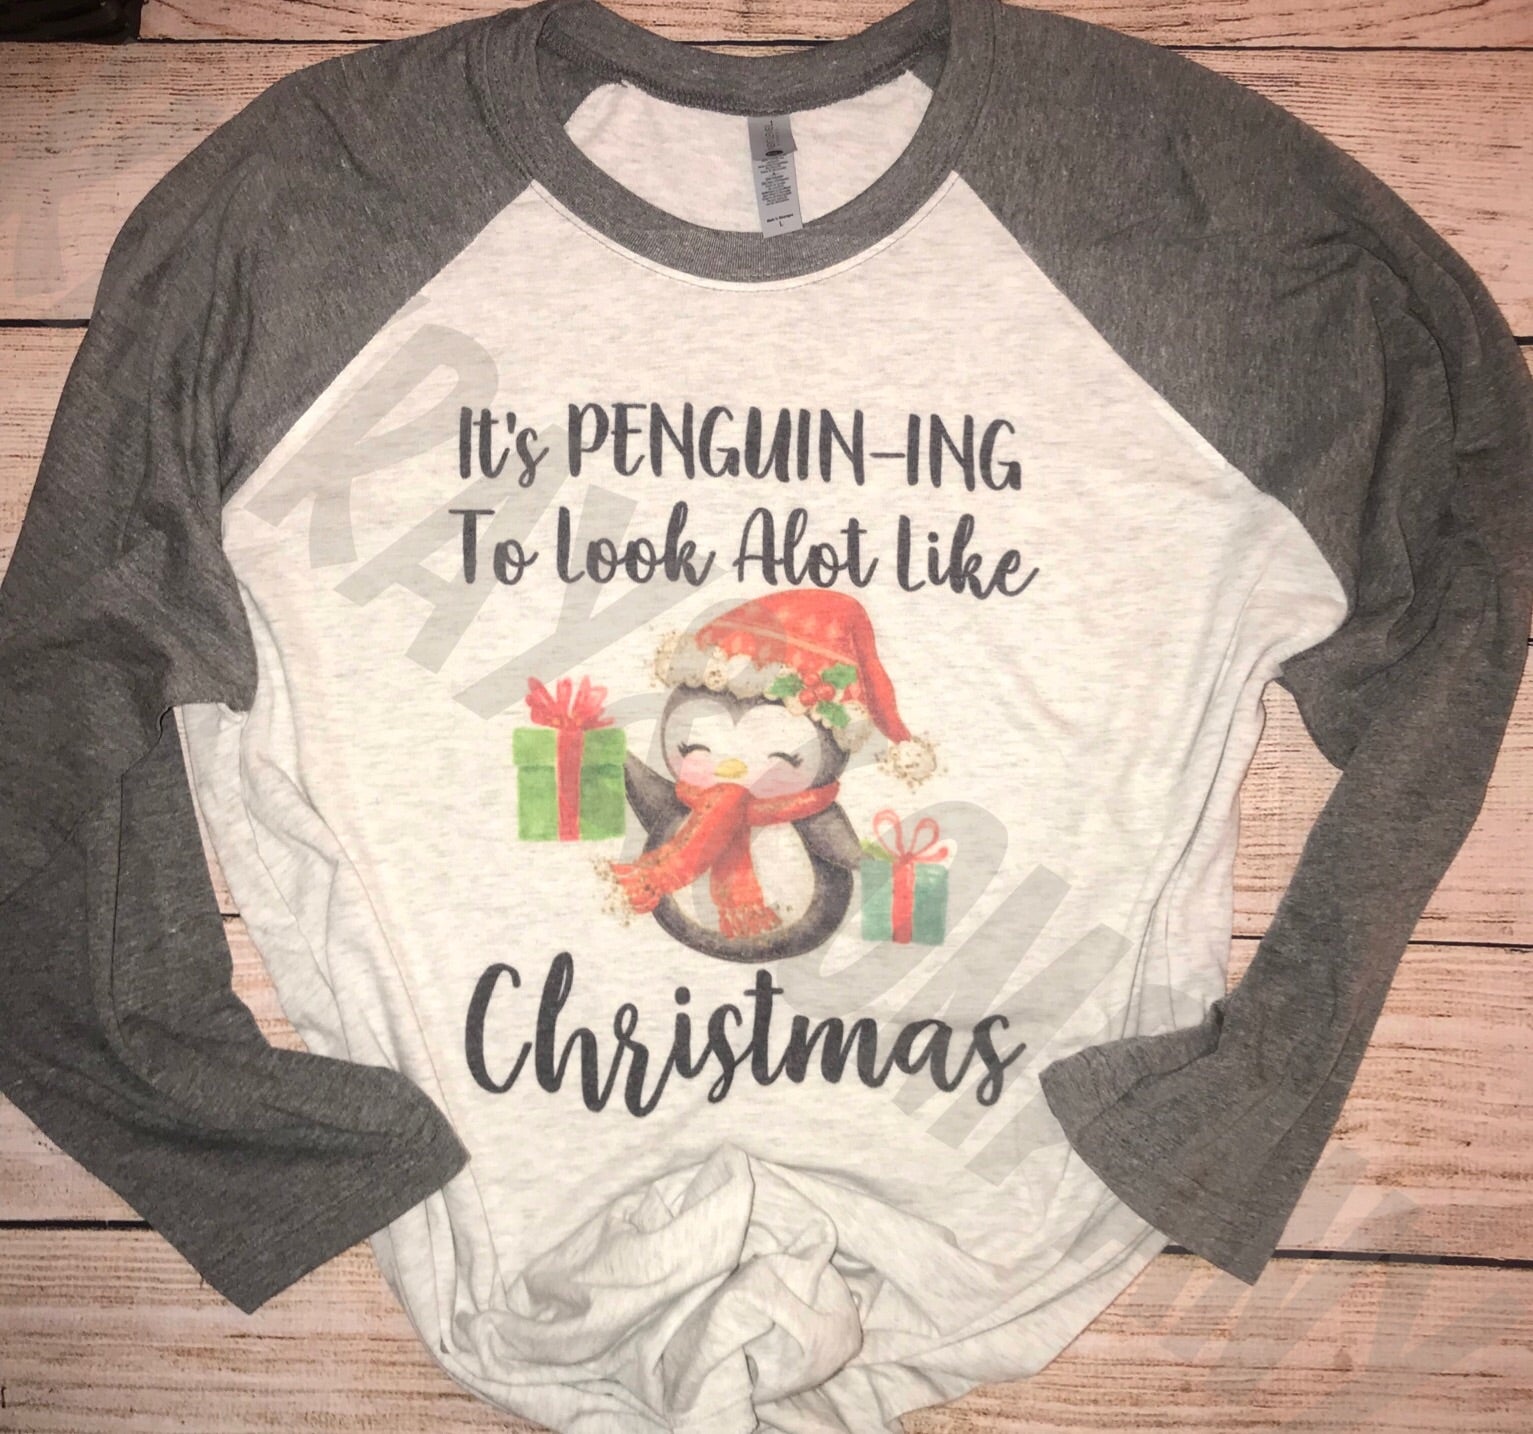 It’s penguining to look a lot like Christmas